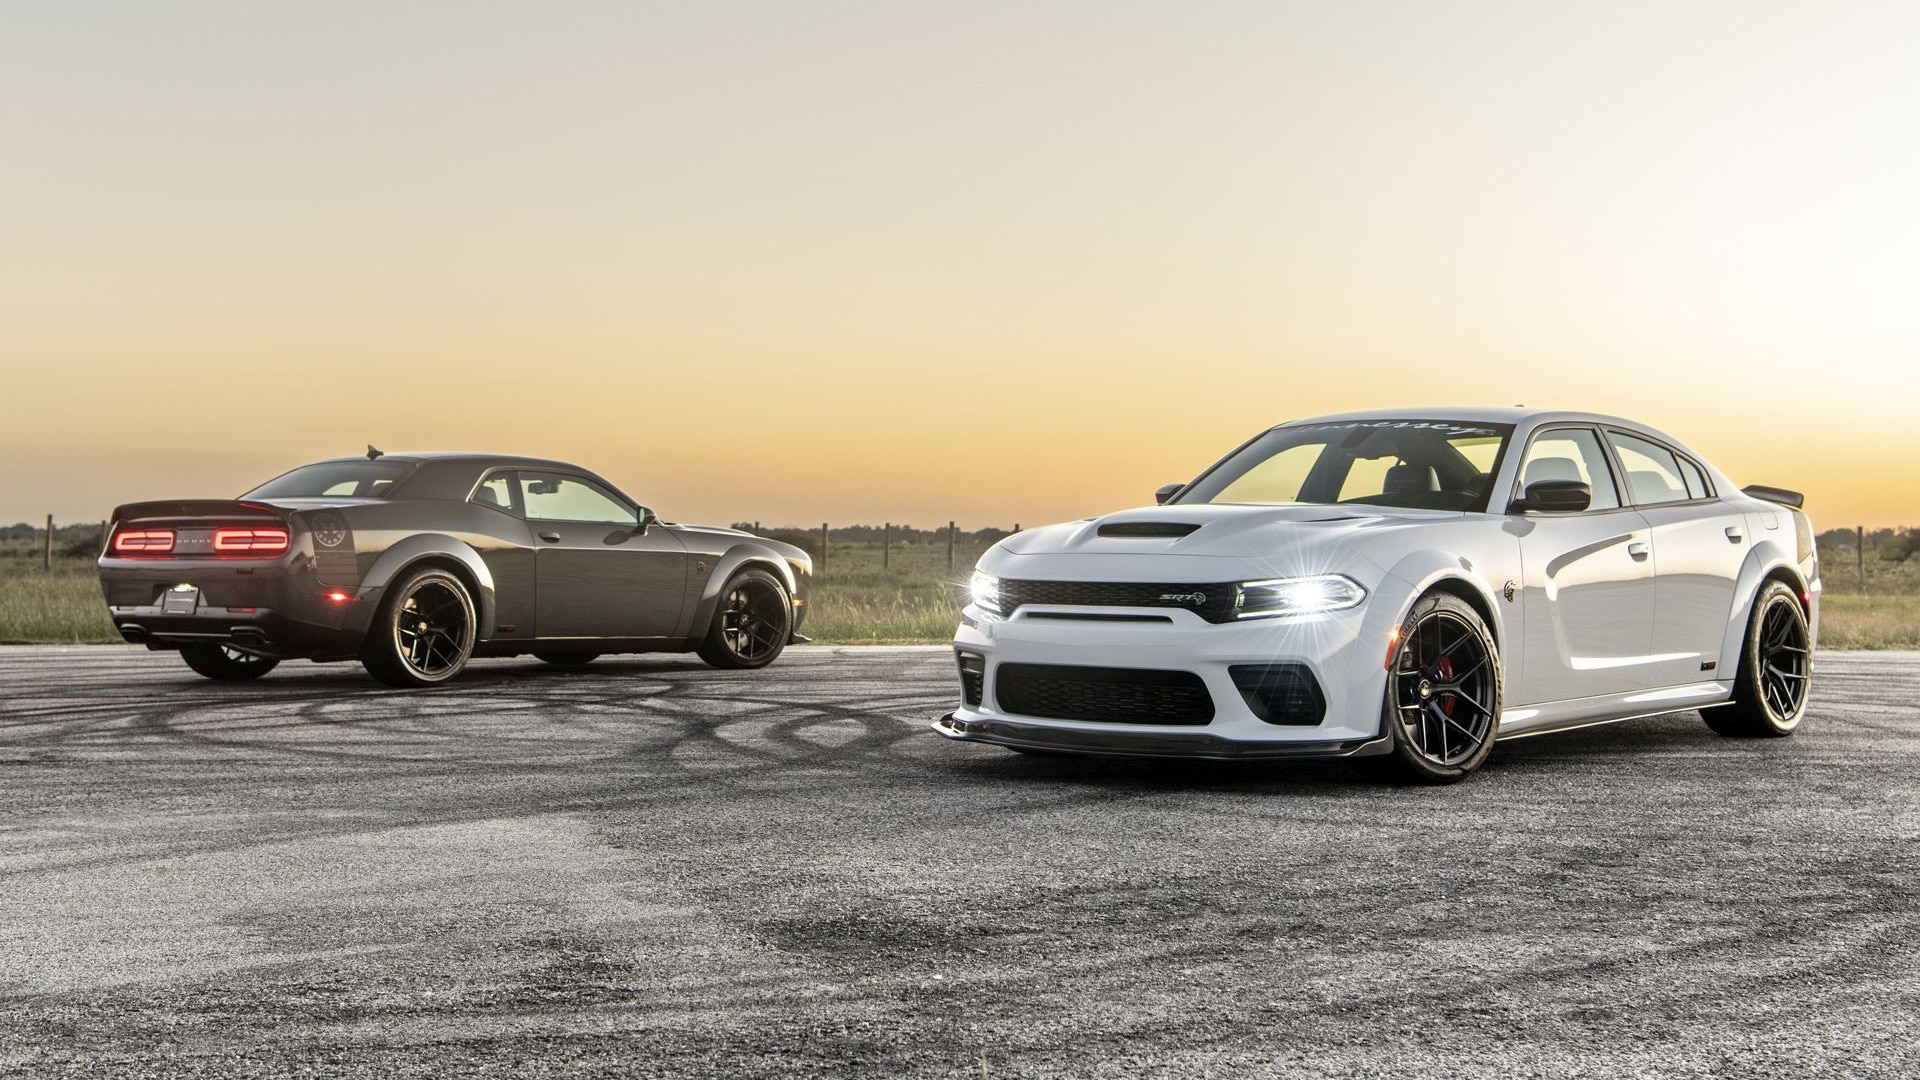 2023 Hennessey H1000 Last Stand Challenger and Charger SRT Hellcat